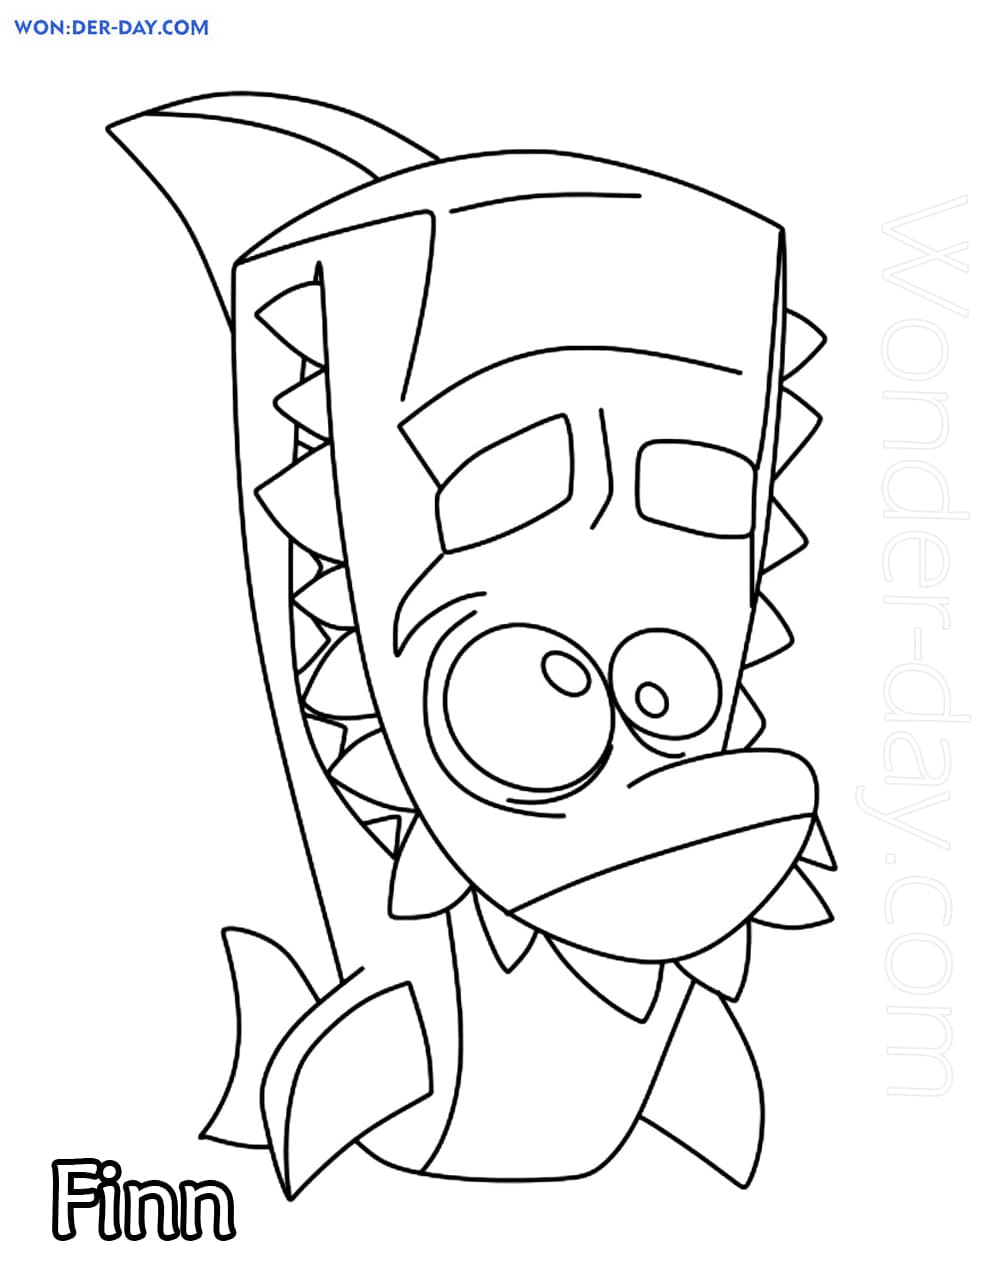 Finn Zooba Coloring Page